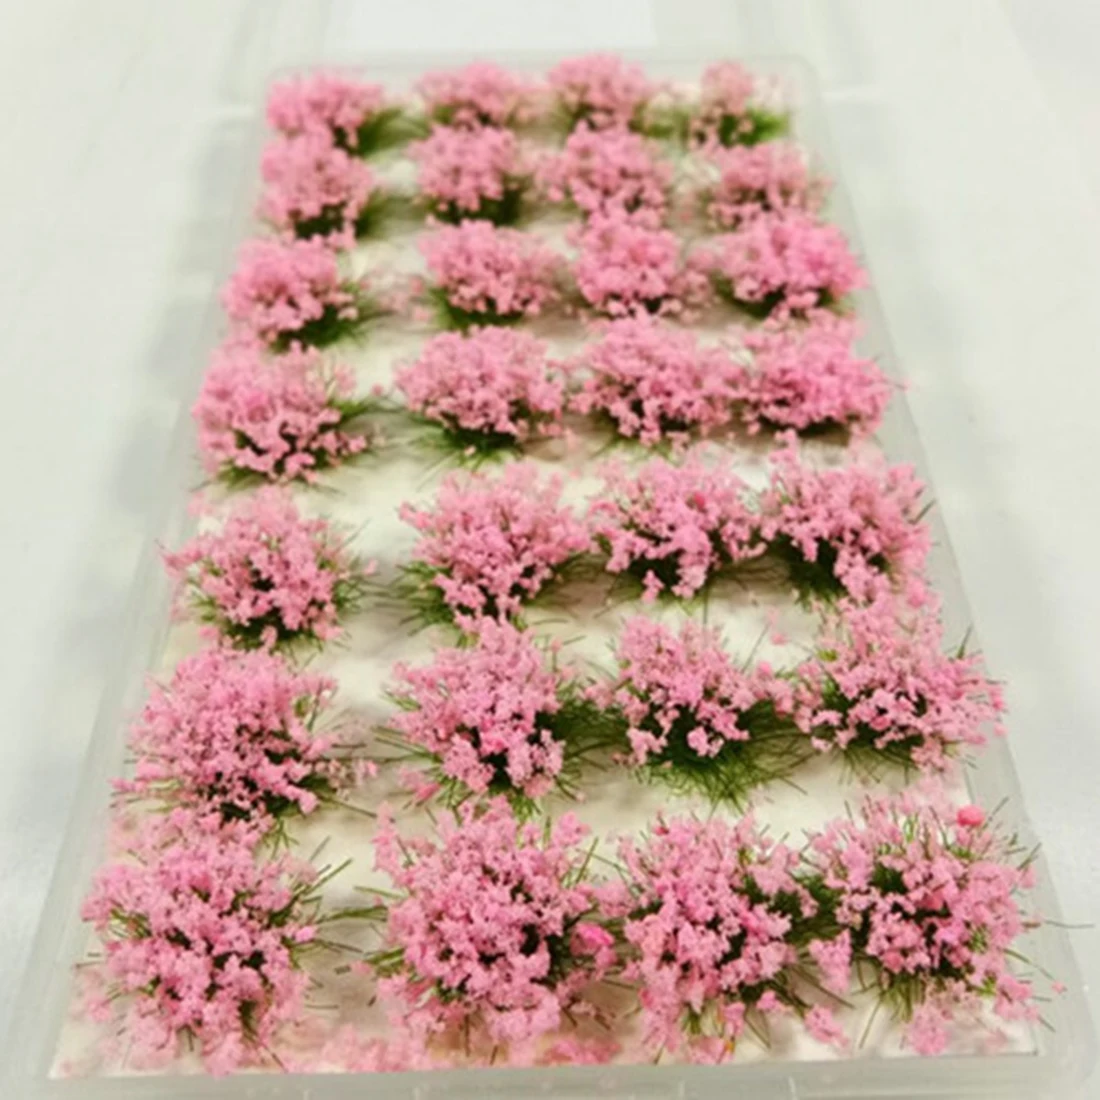 28Pcs Simulation Flower Cluster Flowers Scene Model for 1:35/1:48/1:72/1:87 Scale Sand Table Building Green Leaves Pink Flowers